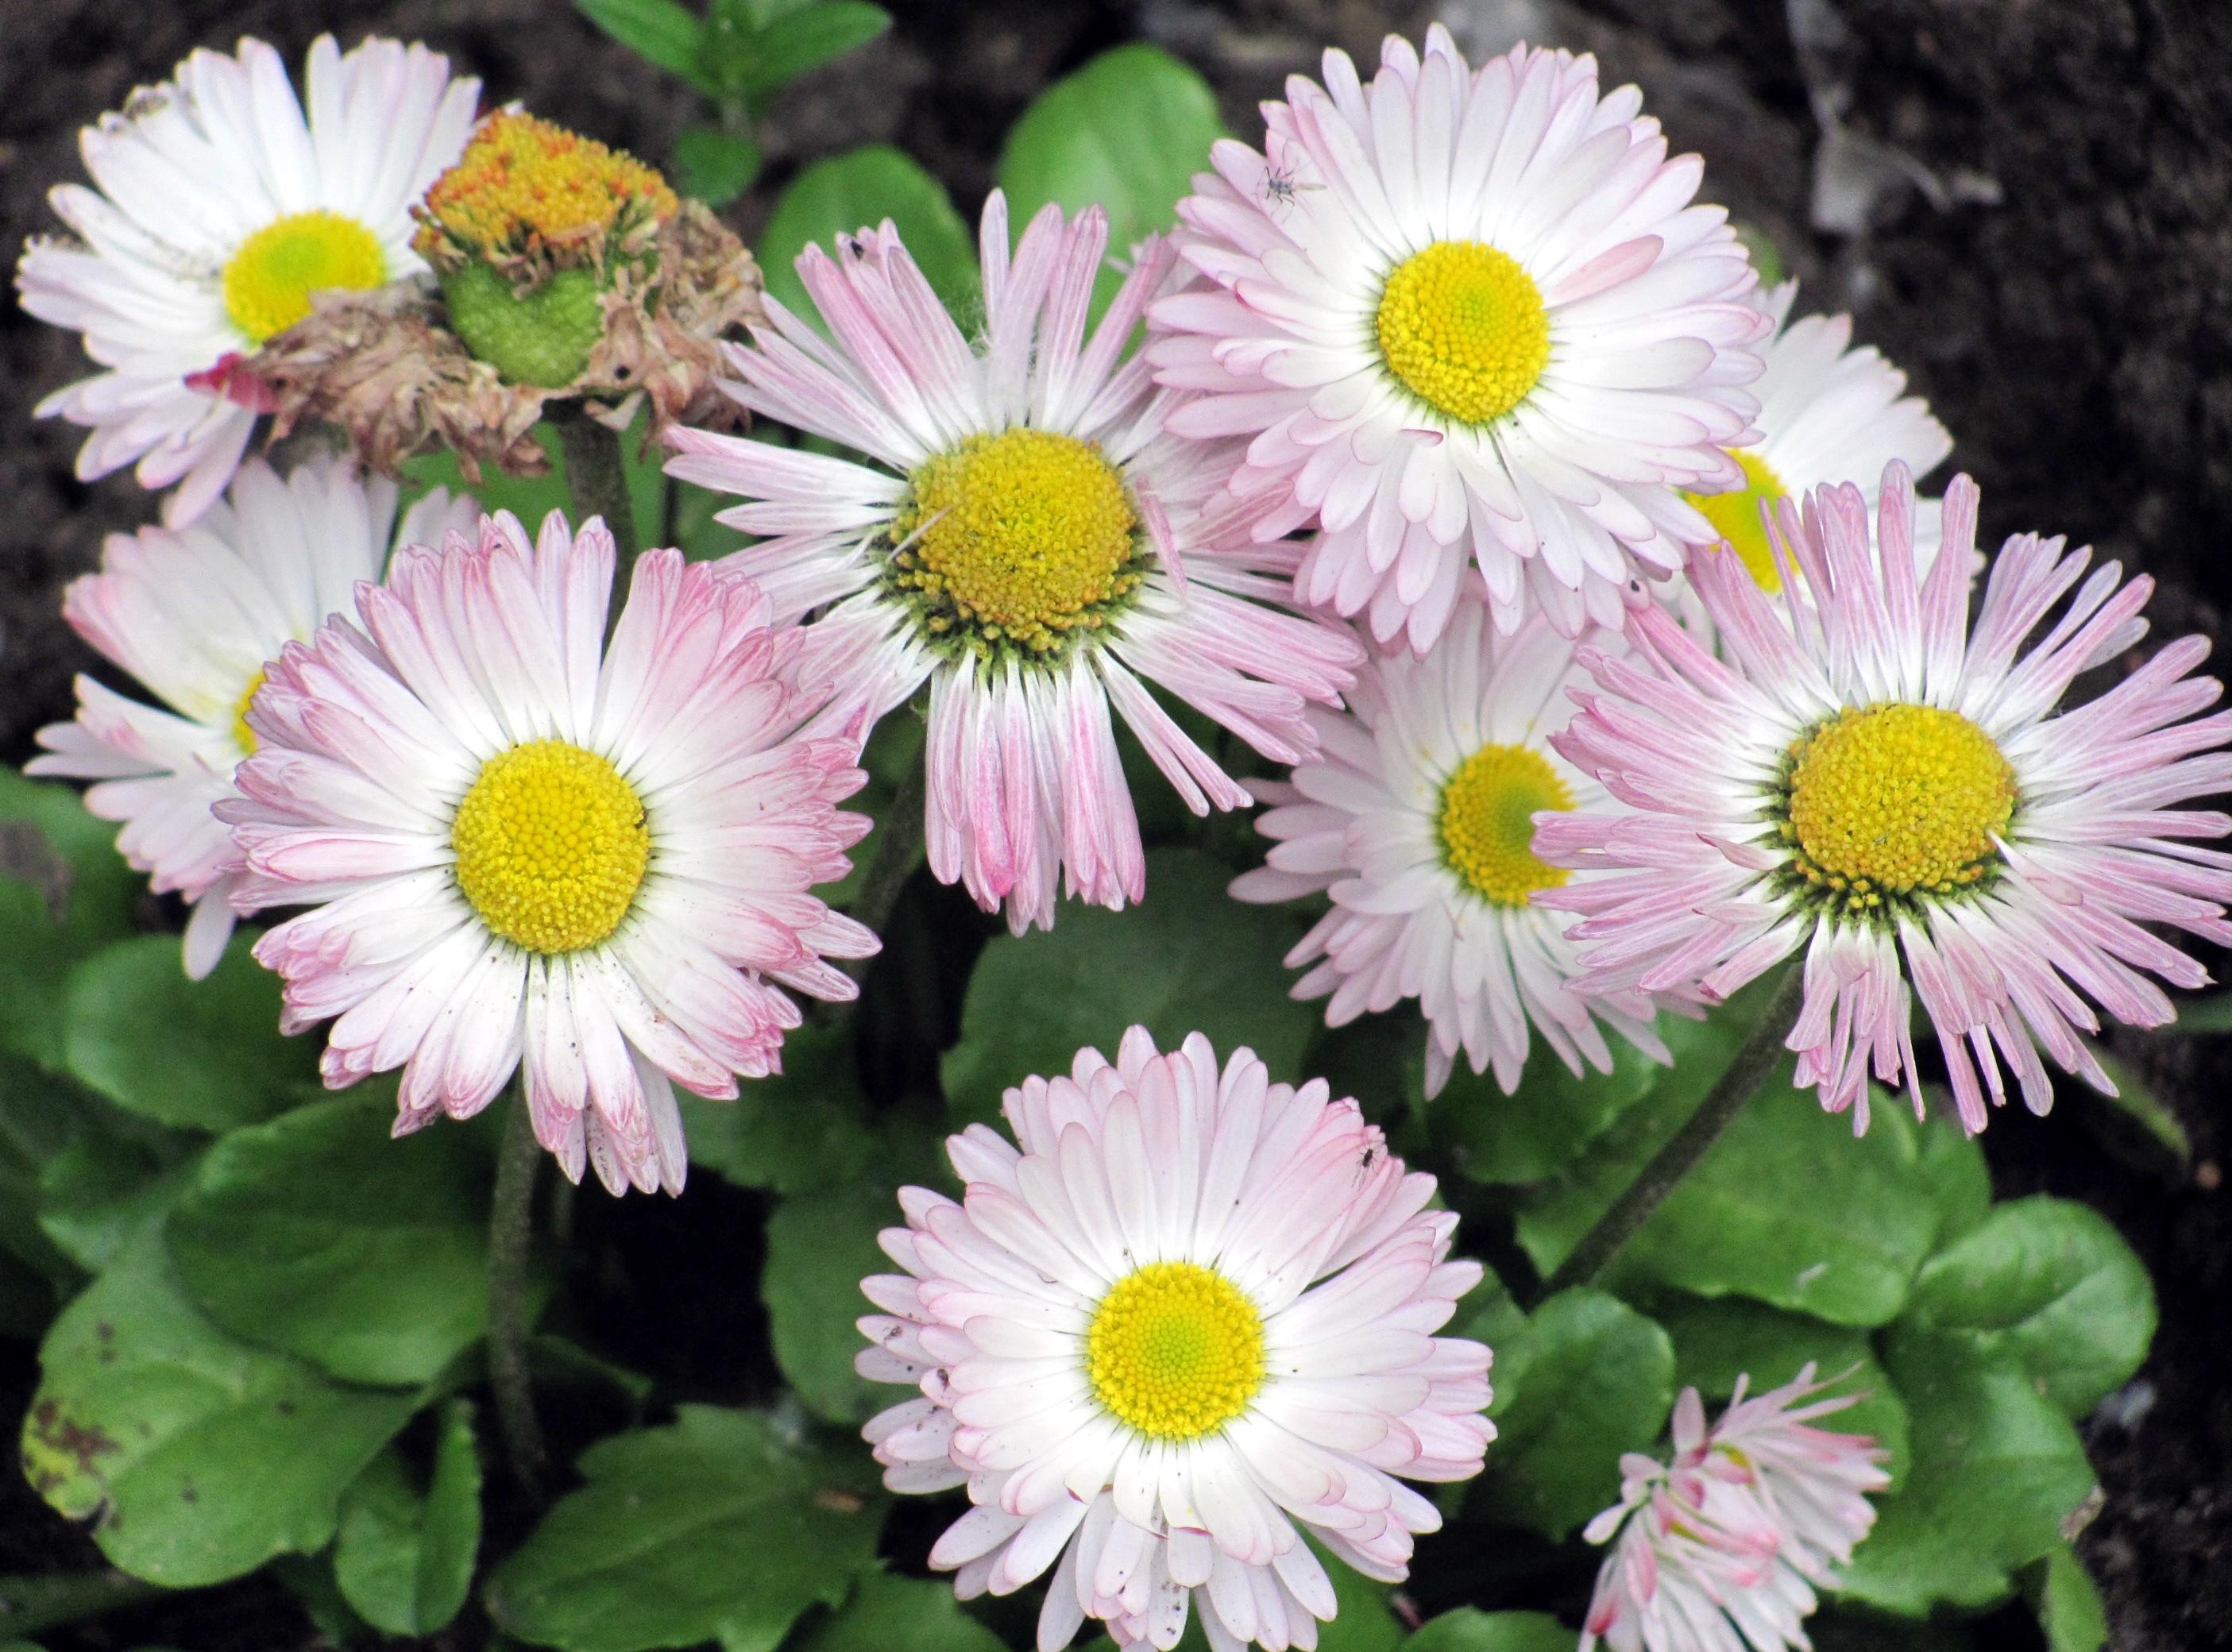 flowers, close up, greens, flower bed, flowerbed, daisies